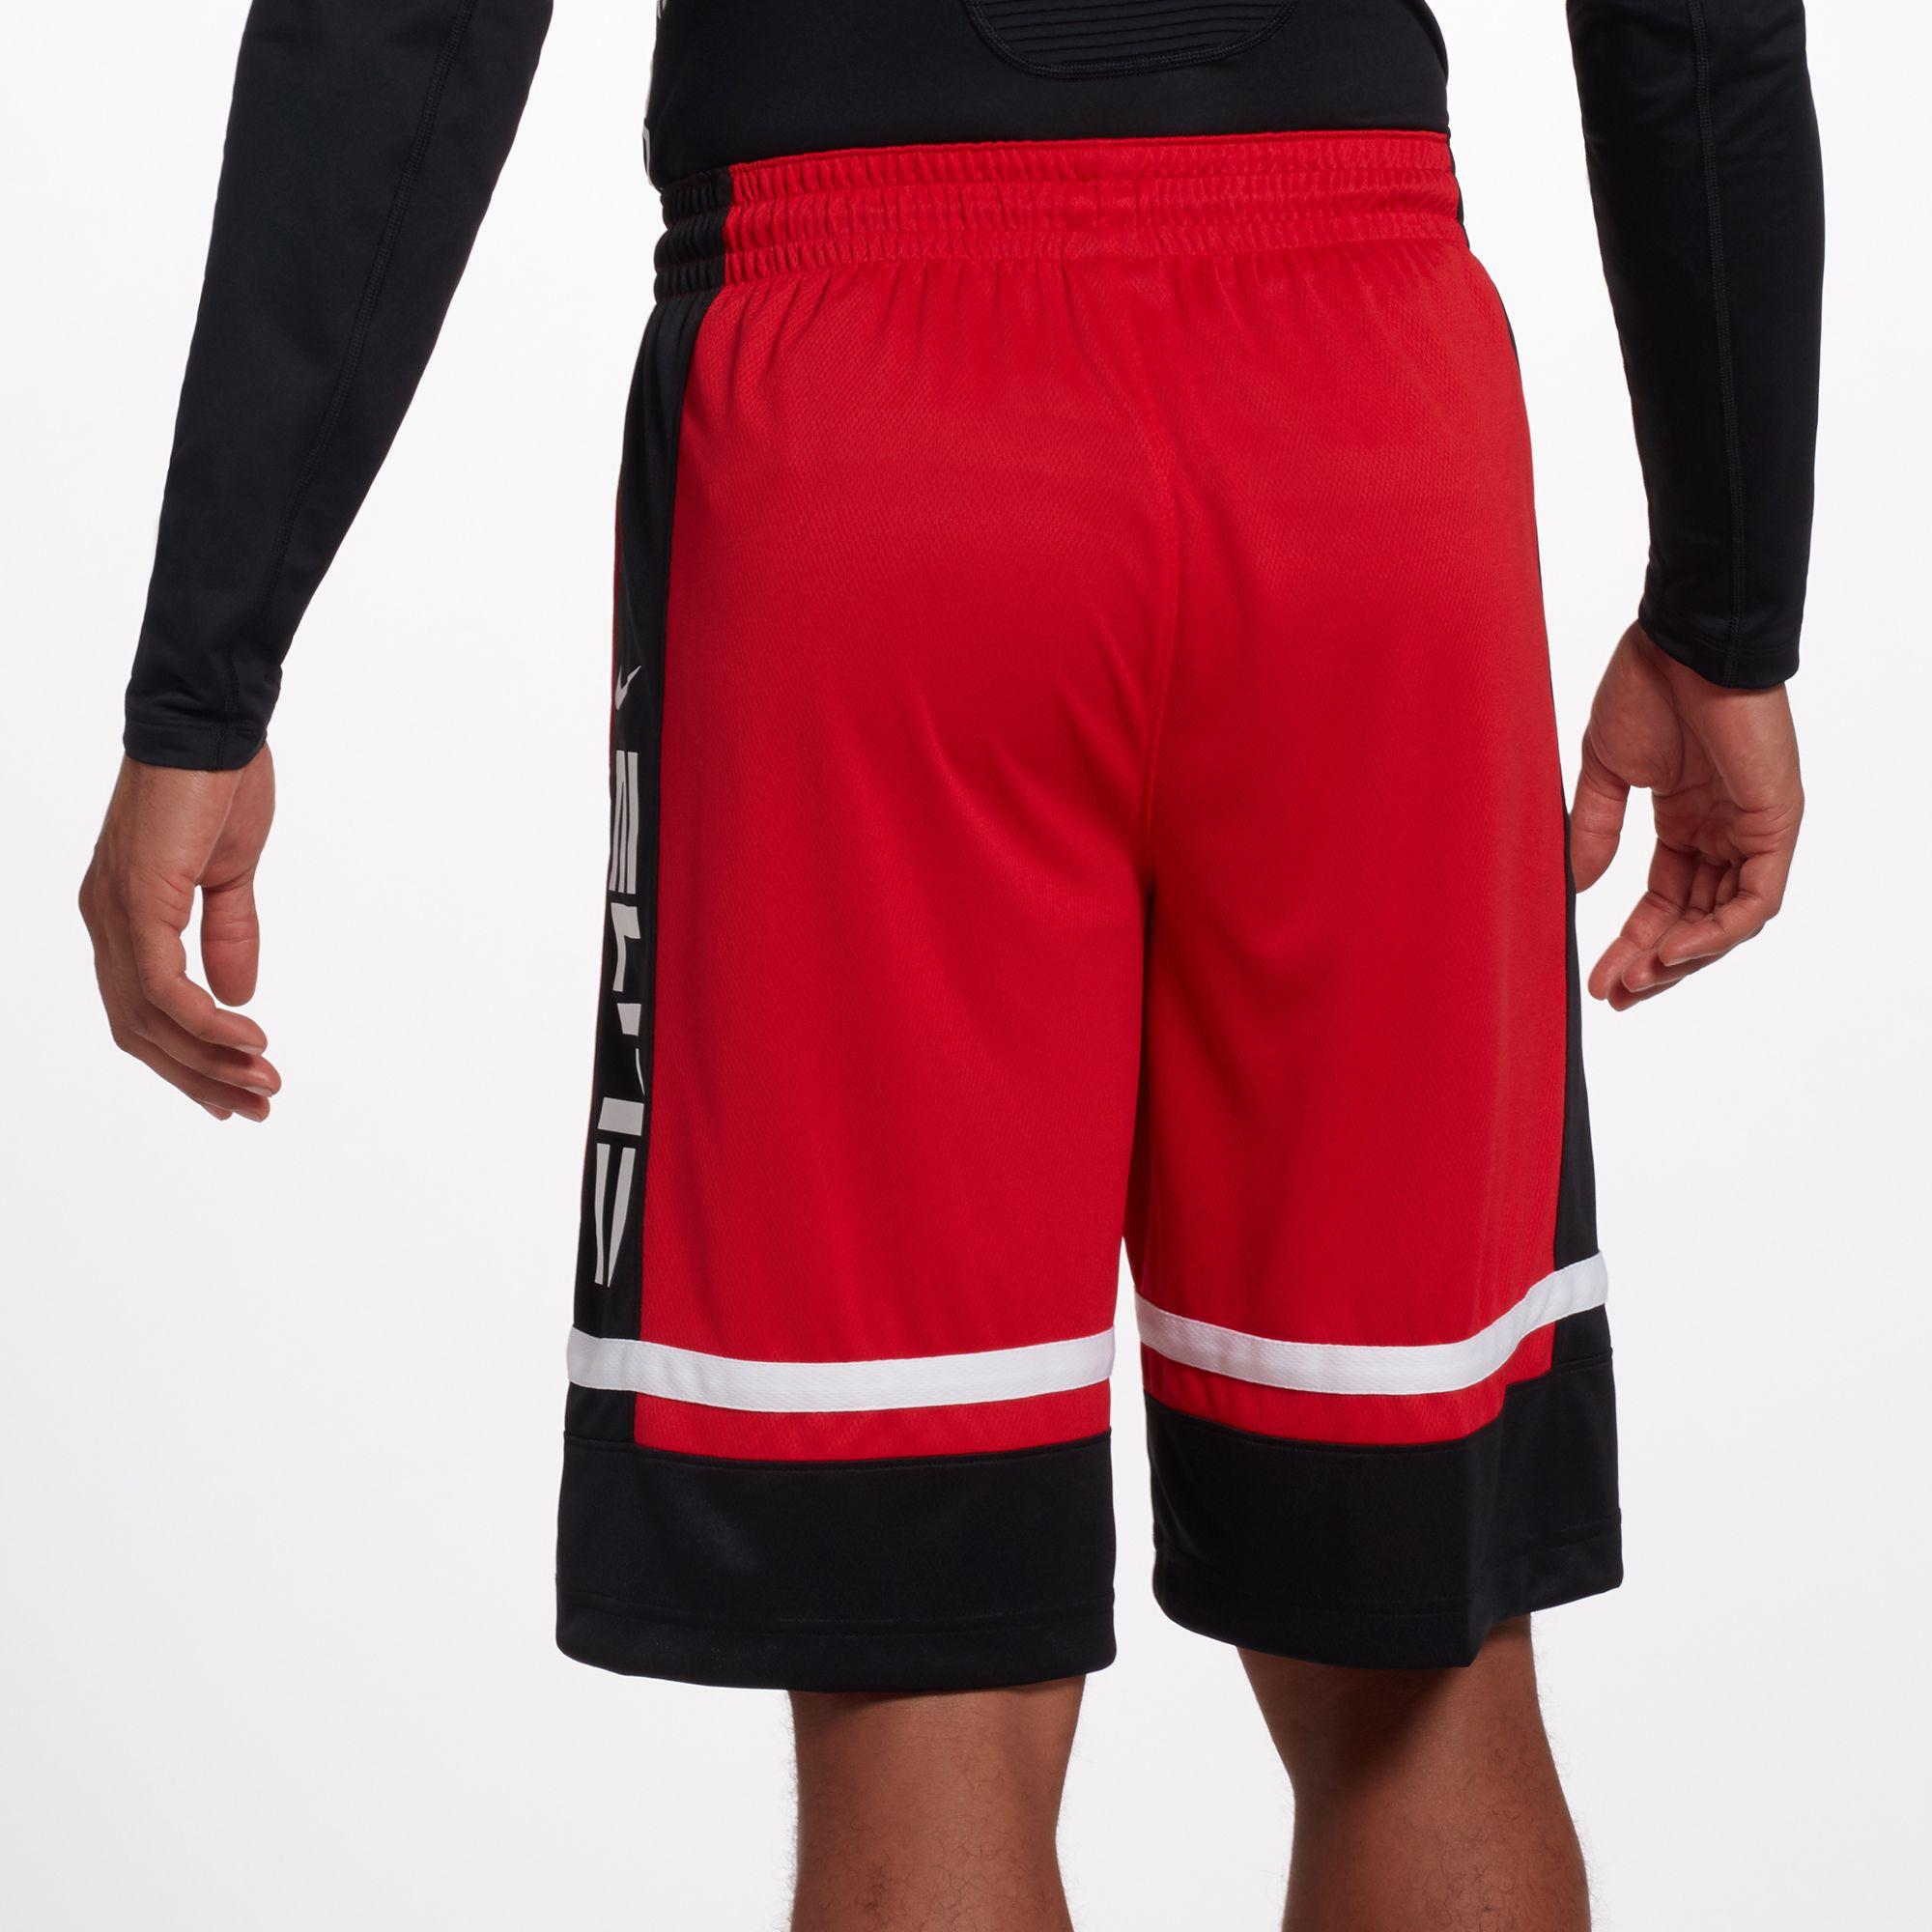 Nike Synthetic Dri-fit Elite Basketball Shorts in Red for Men - Lyst